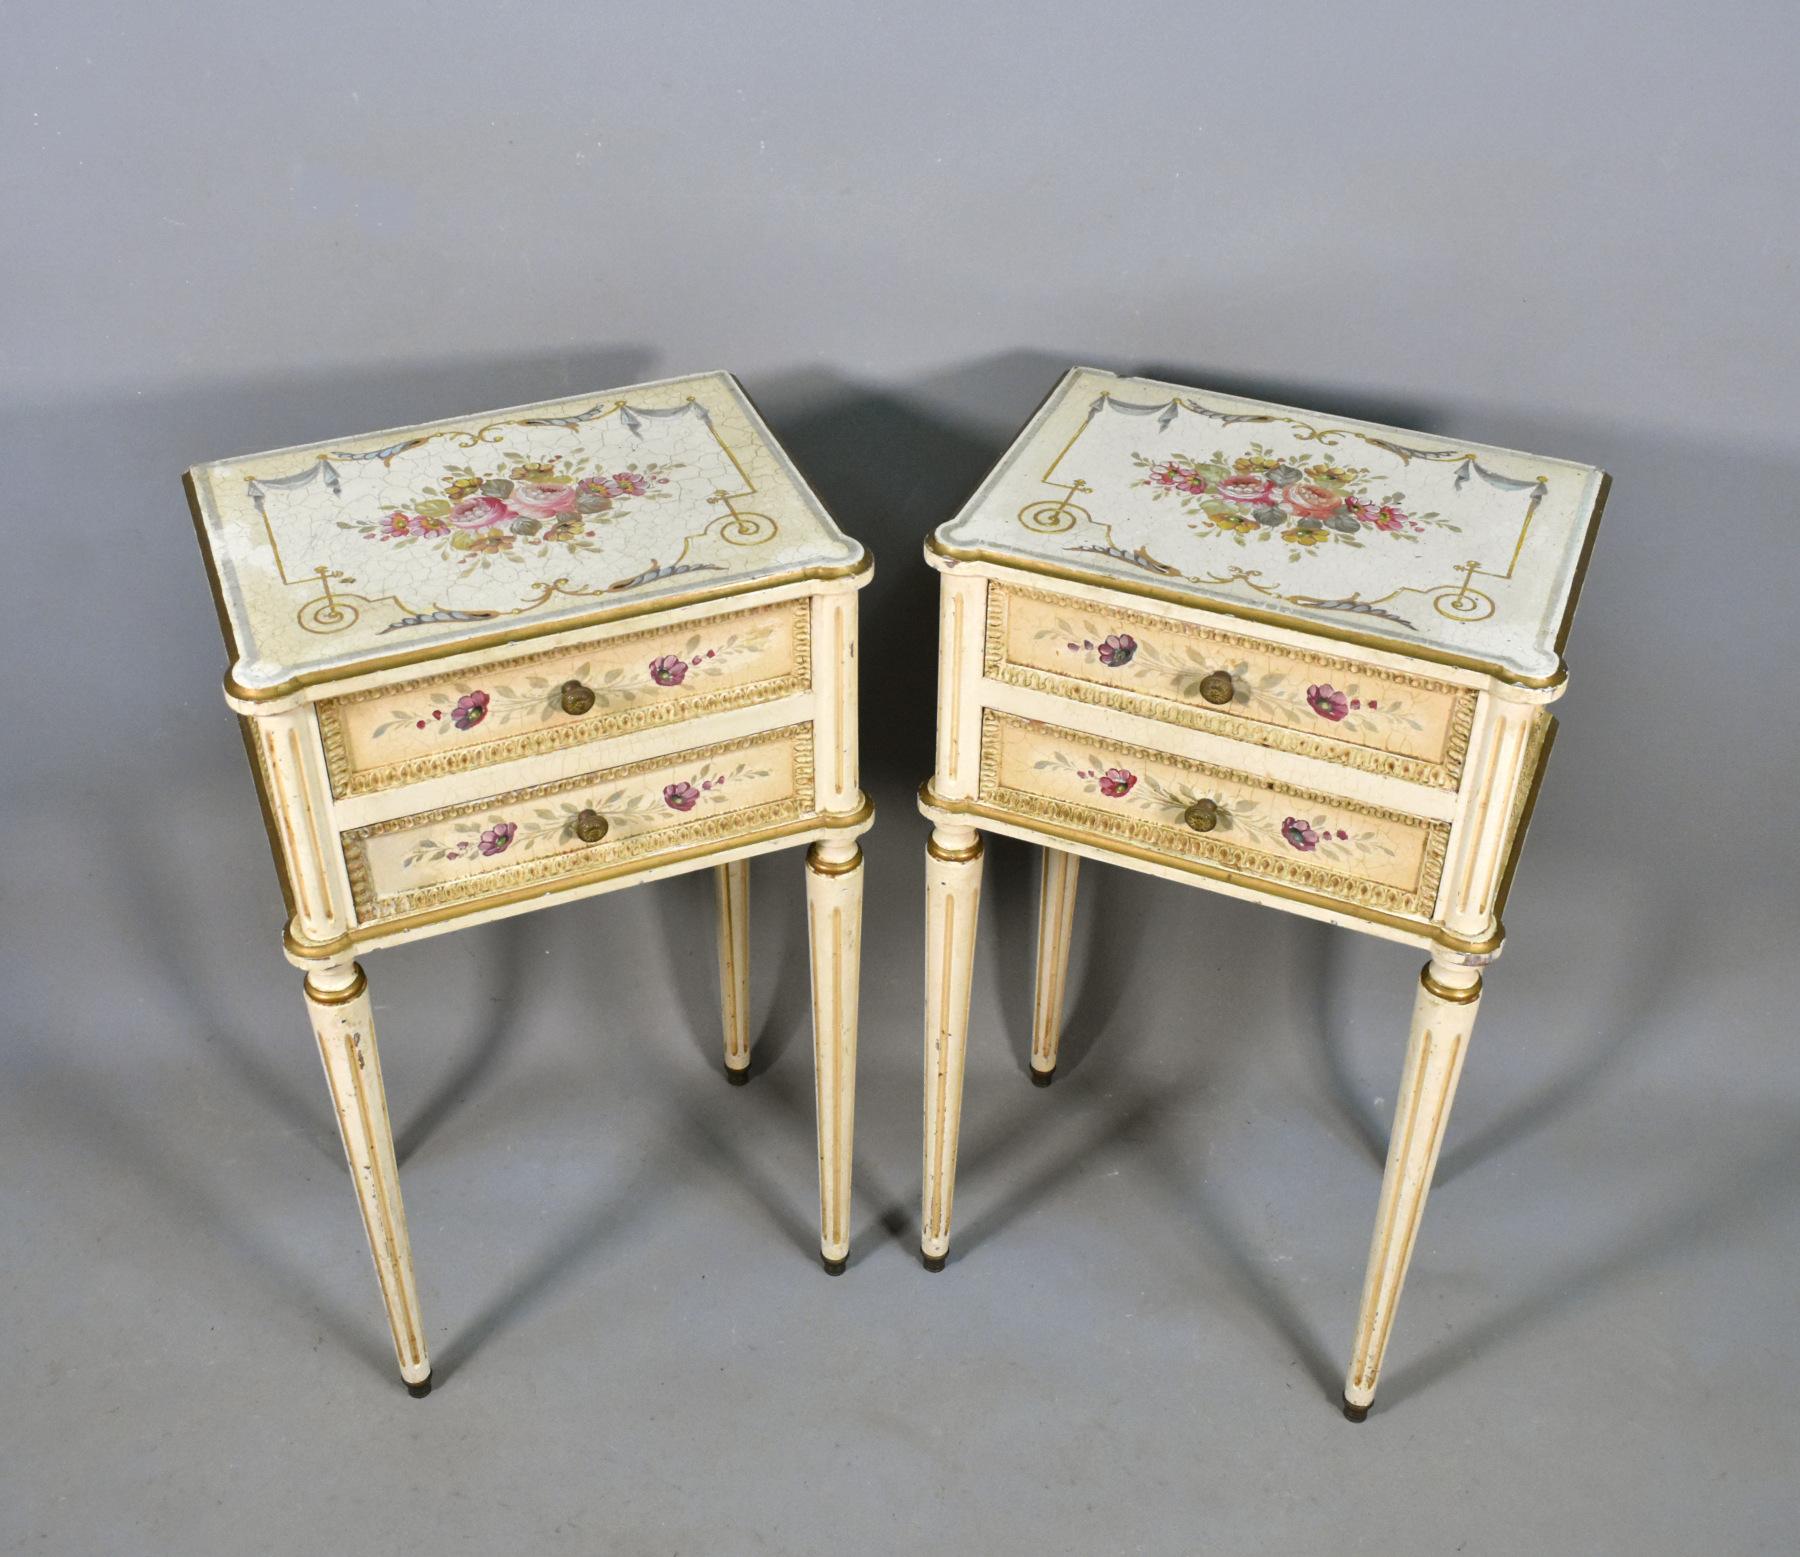 Painted Pair of French Craquelure Nightstands